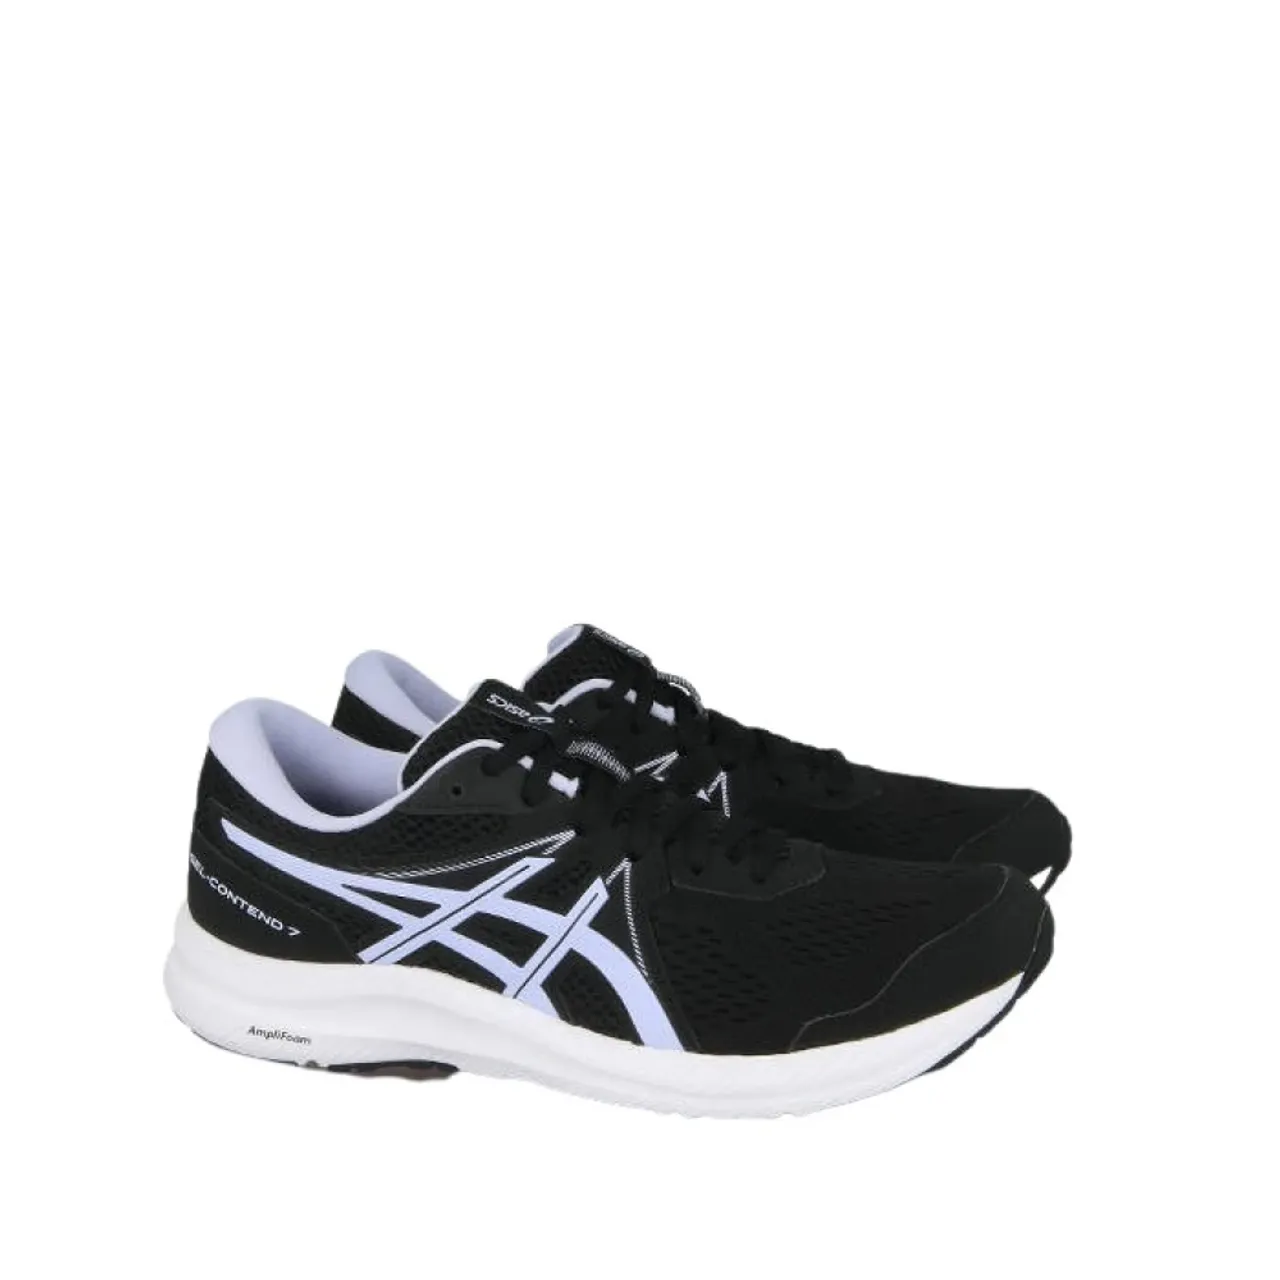 Asics , 7 Sneakers, Gel-Contend Style ,Black male, Sizes: